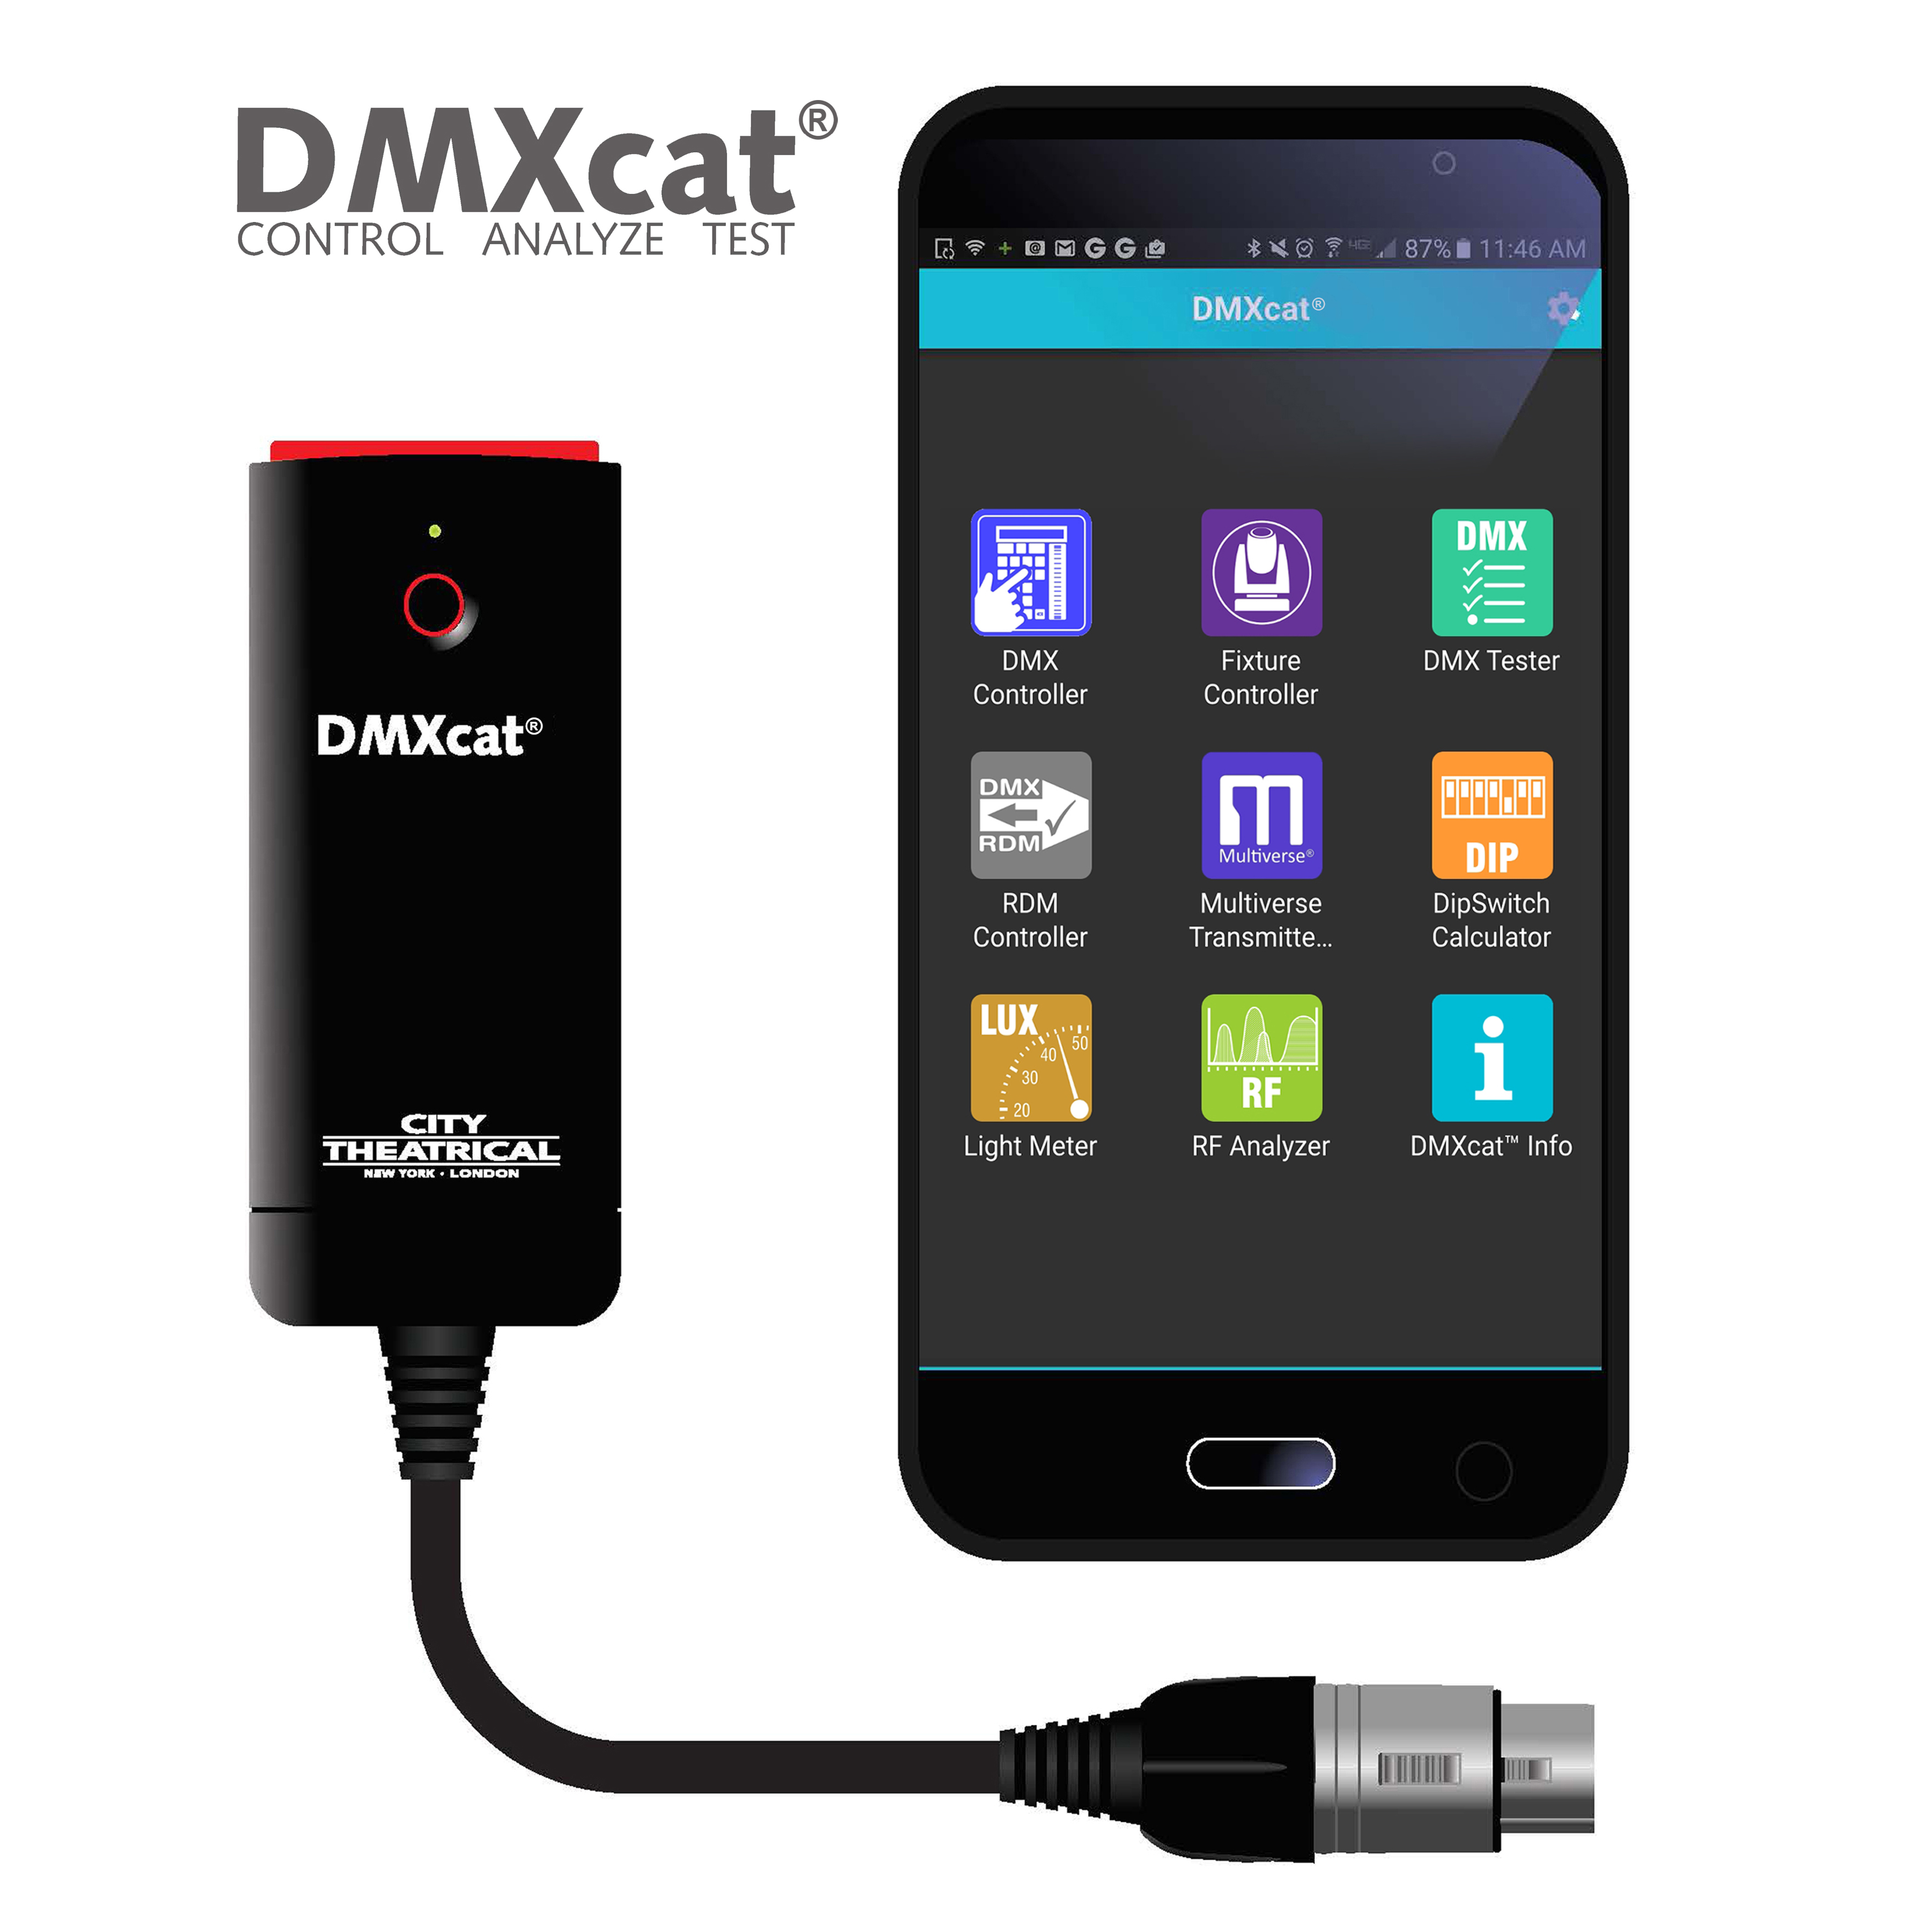 DMXcat hardware dongle and smartphone app